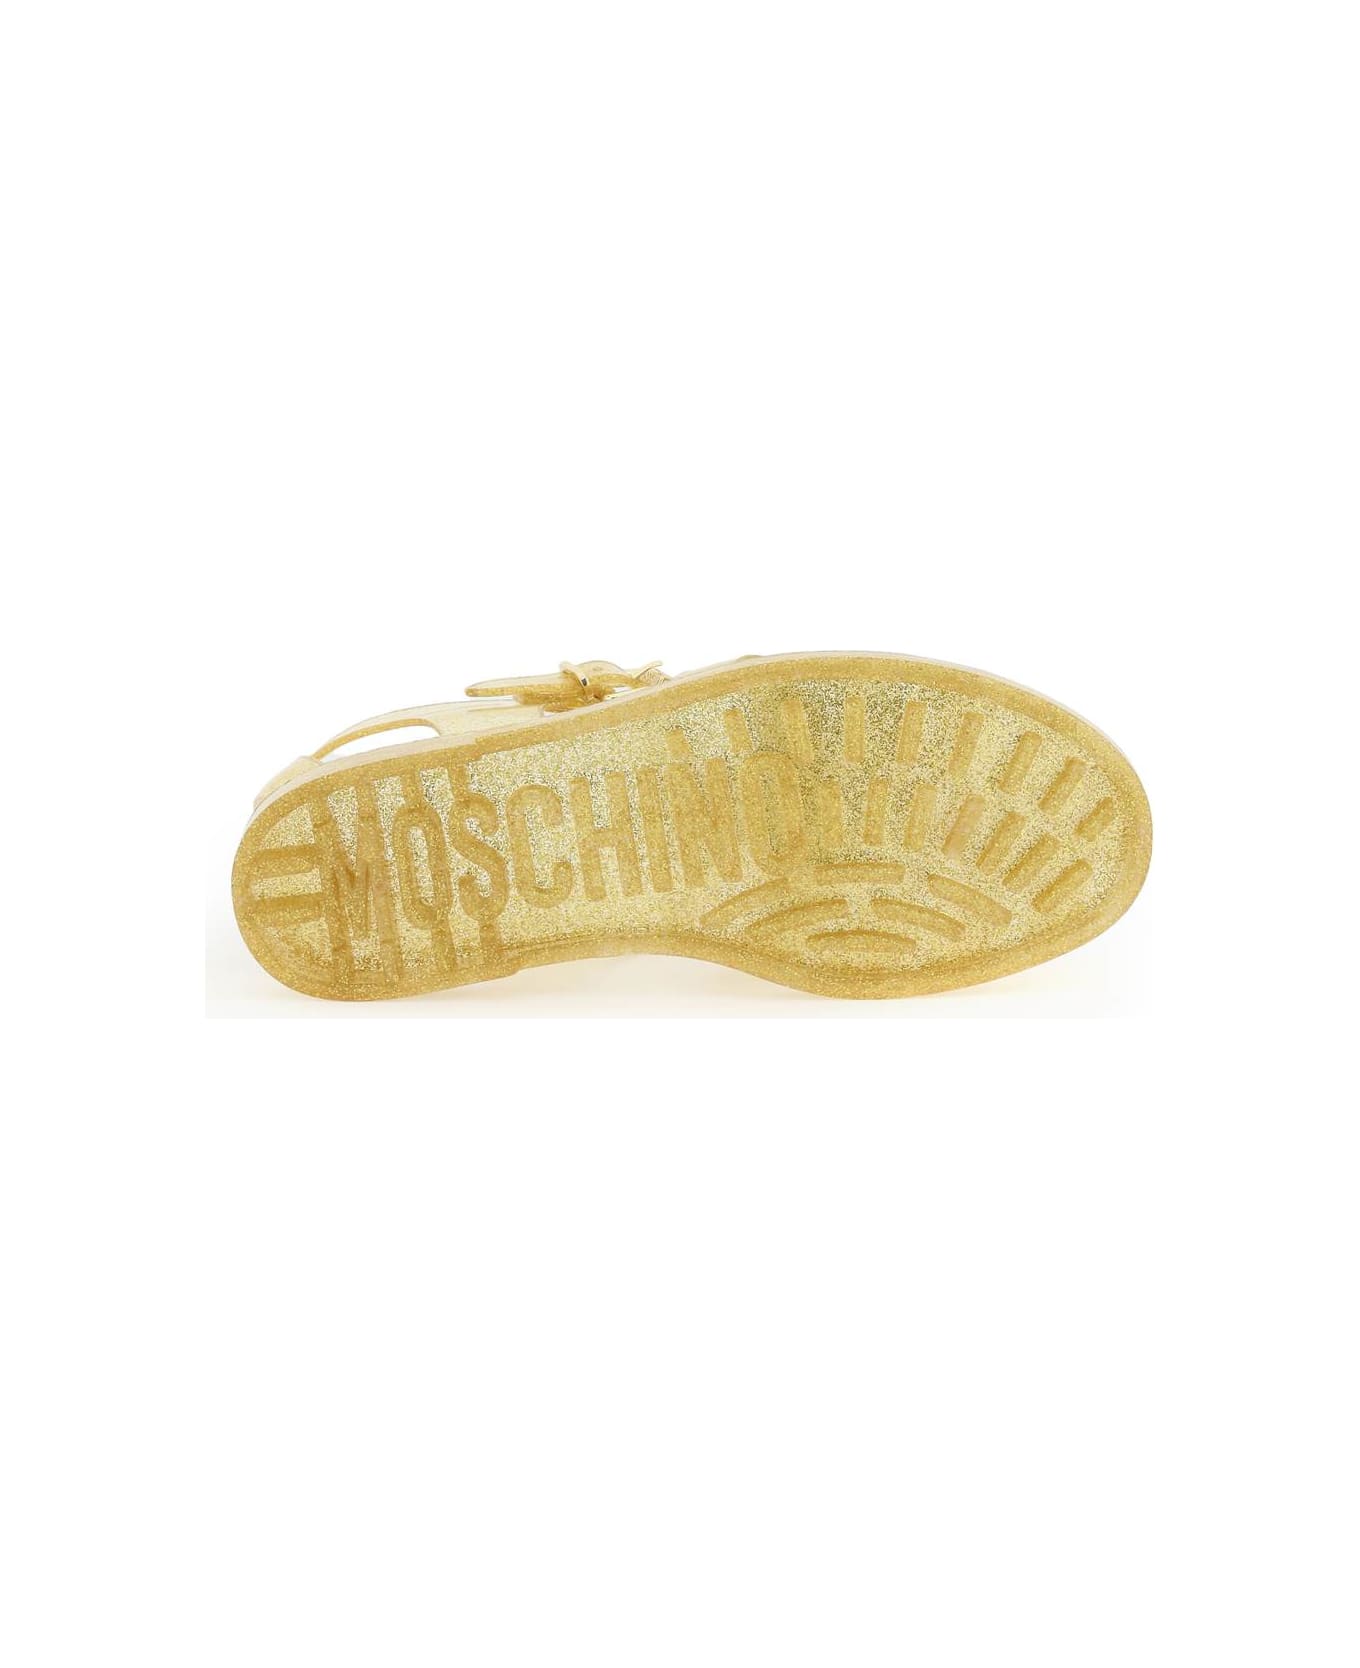 Moschino Jelly Sandals With Logo - ORO (Gold)